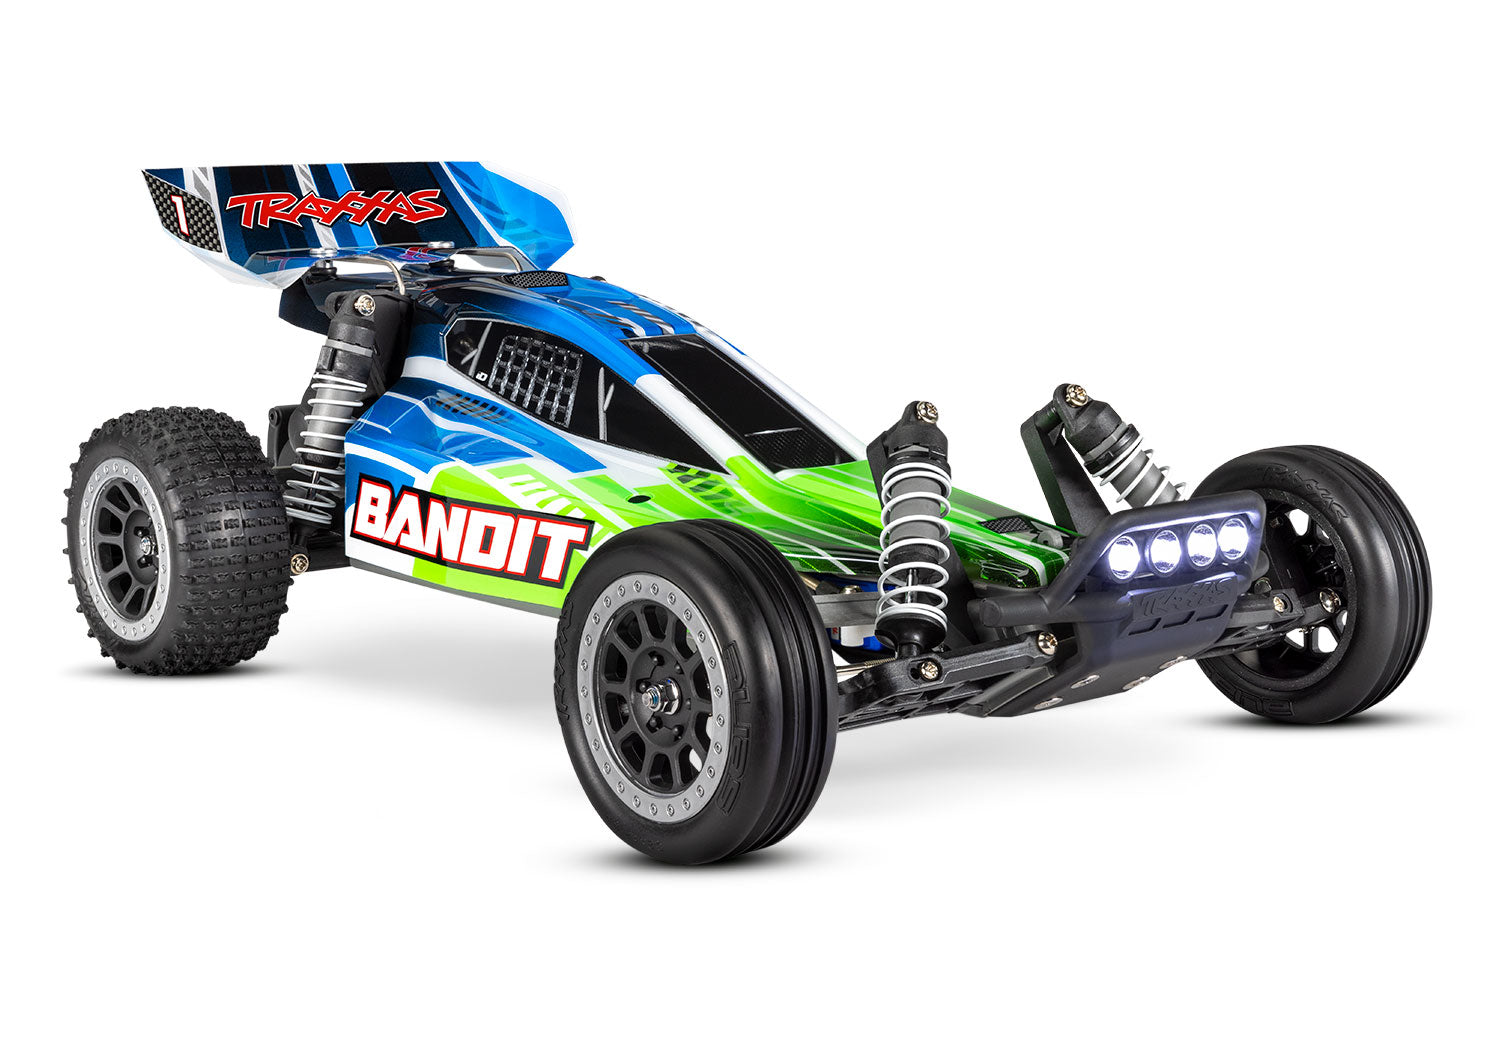 TRAXXAS 24054-61 Bandit® 1/10 scale waterproof buggy. RTR, 8.4V NiMH 3000 mAh battery, 4-amp DC Peak Detecting Fast Charger, LED lighting, and painted body.